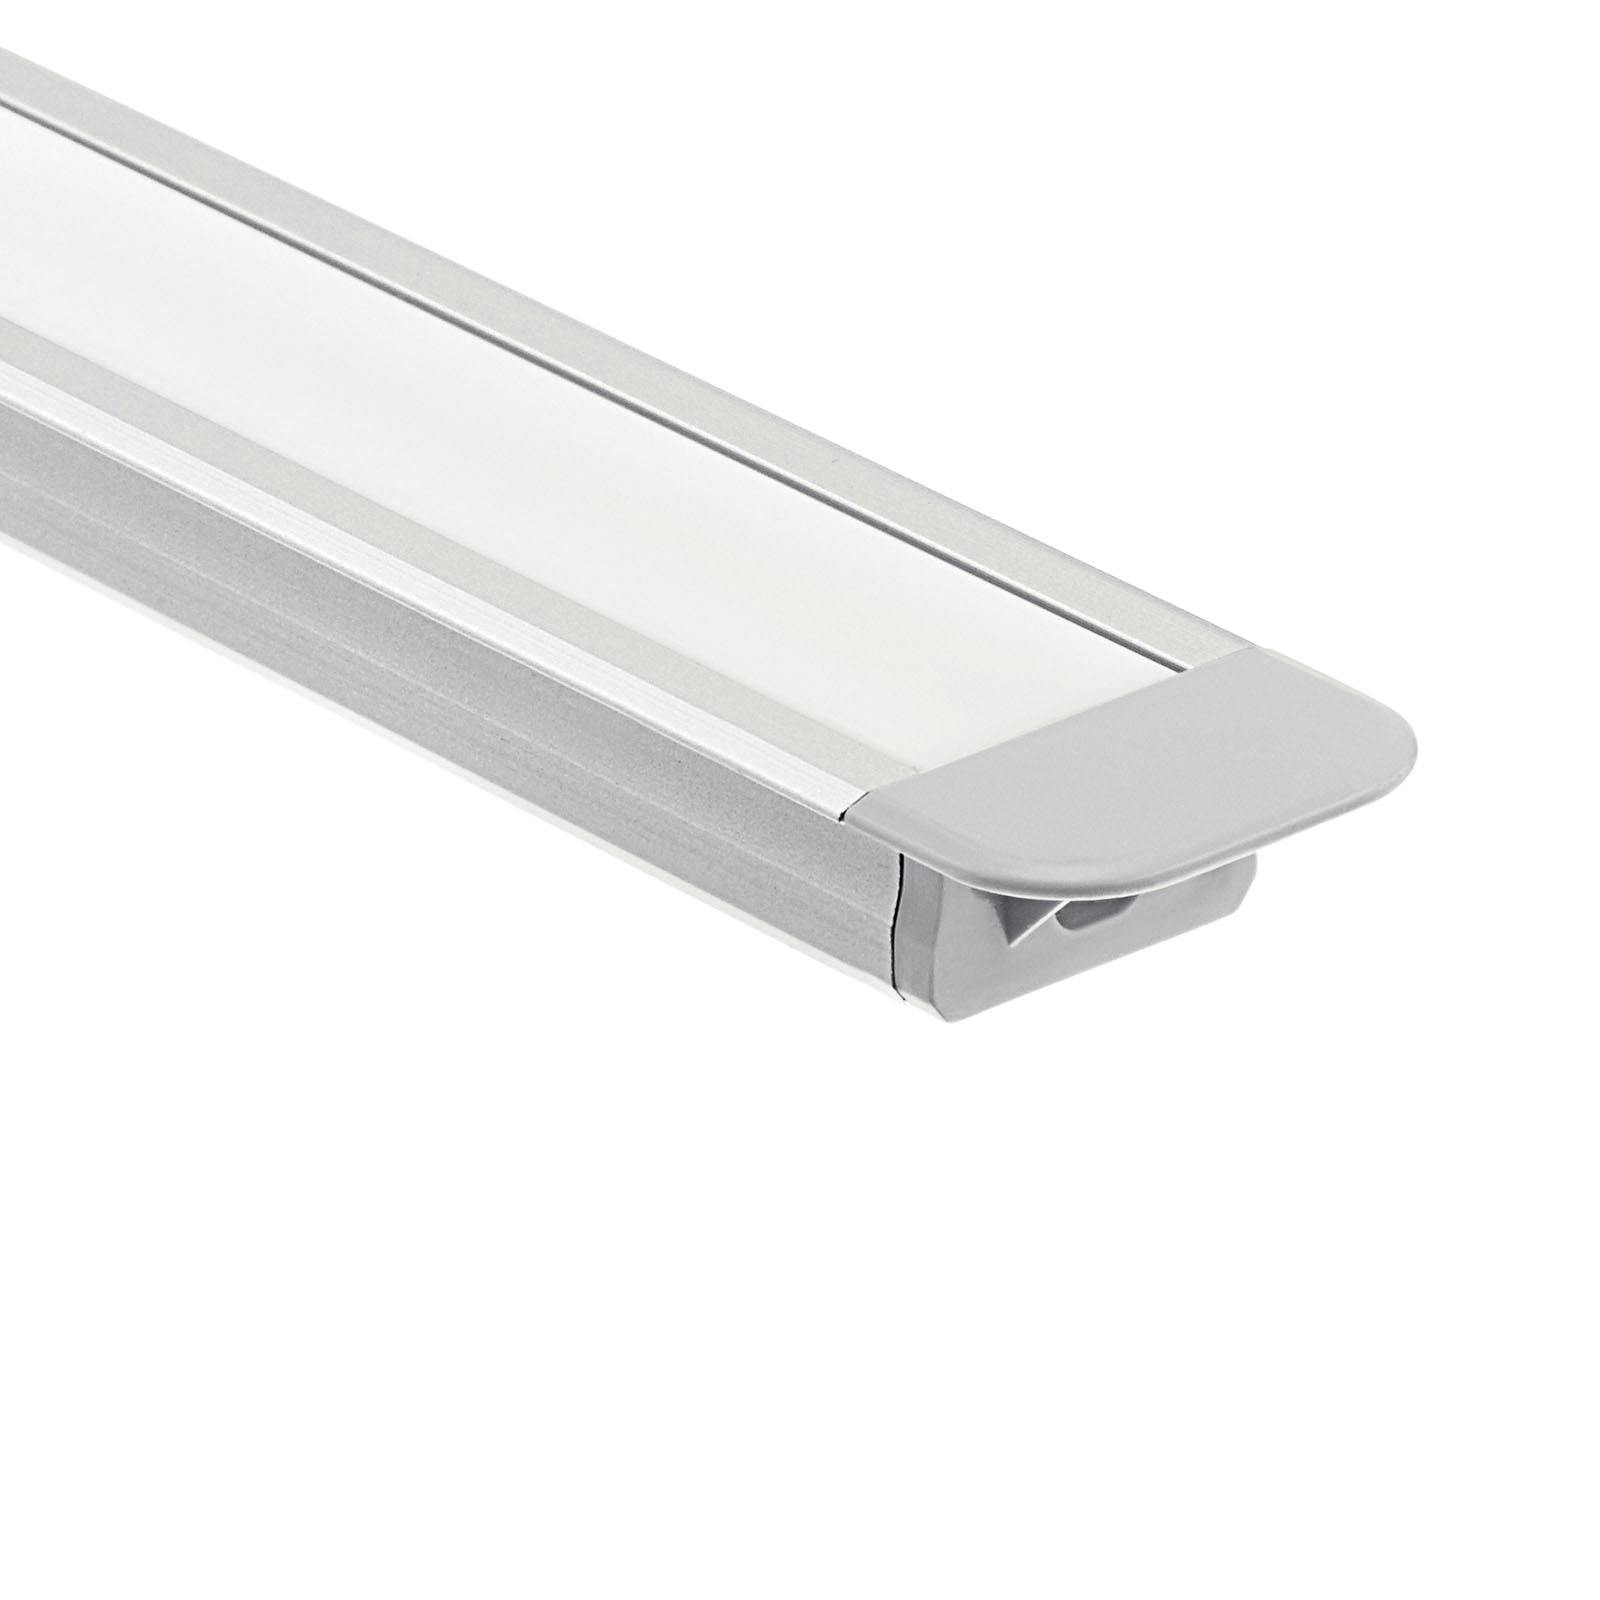 2' Standard Depth Recessed Channel Silver on a white background